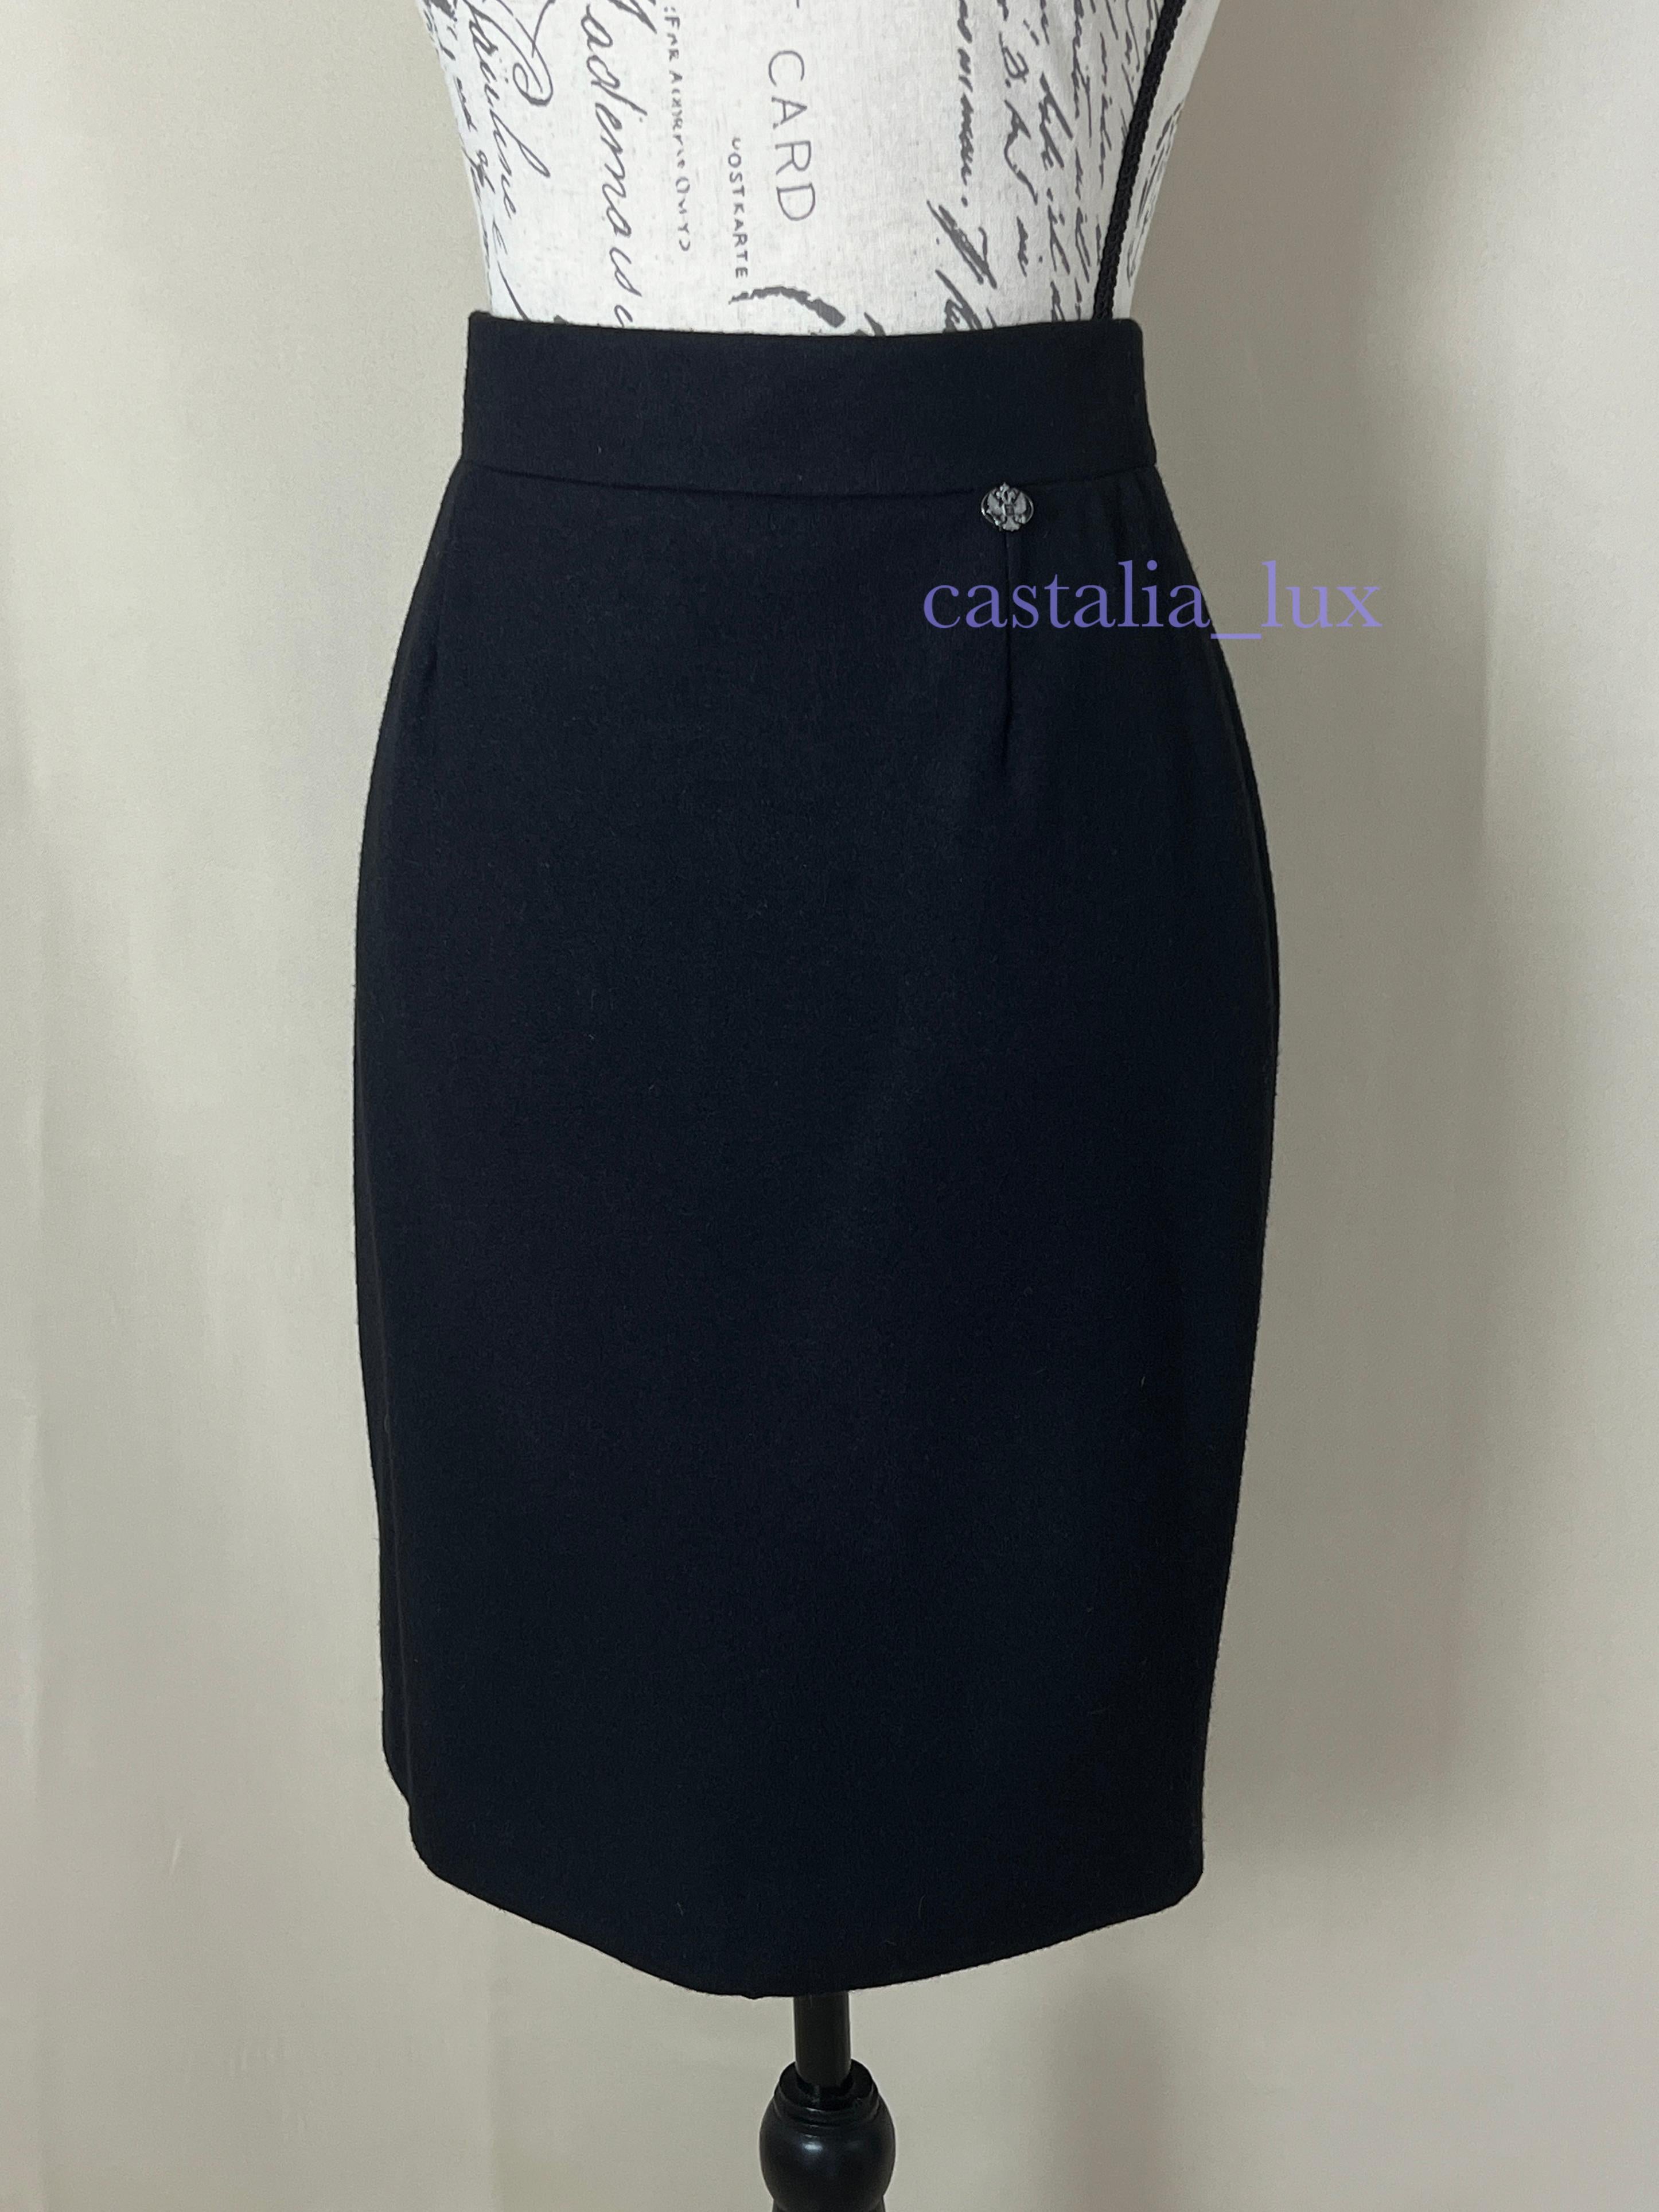 Chanel New Eagle Charm Black Pencil Skirt For Sale 3